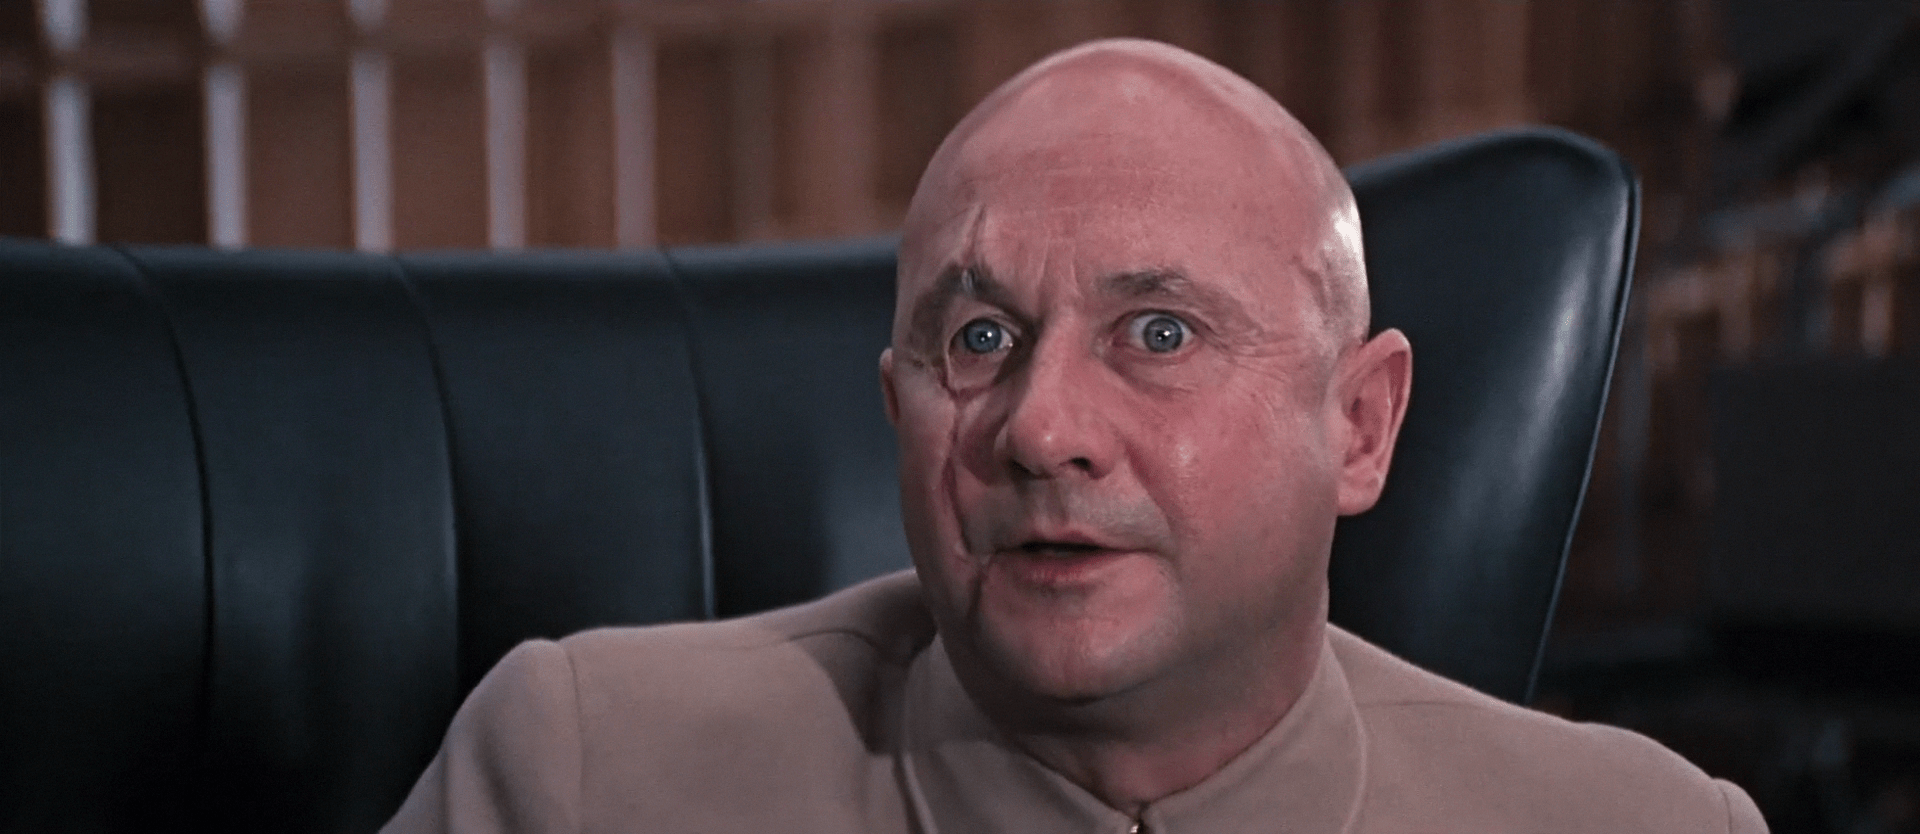 Donald Pleasence in "You Only Live Twice" (1967)